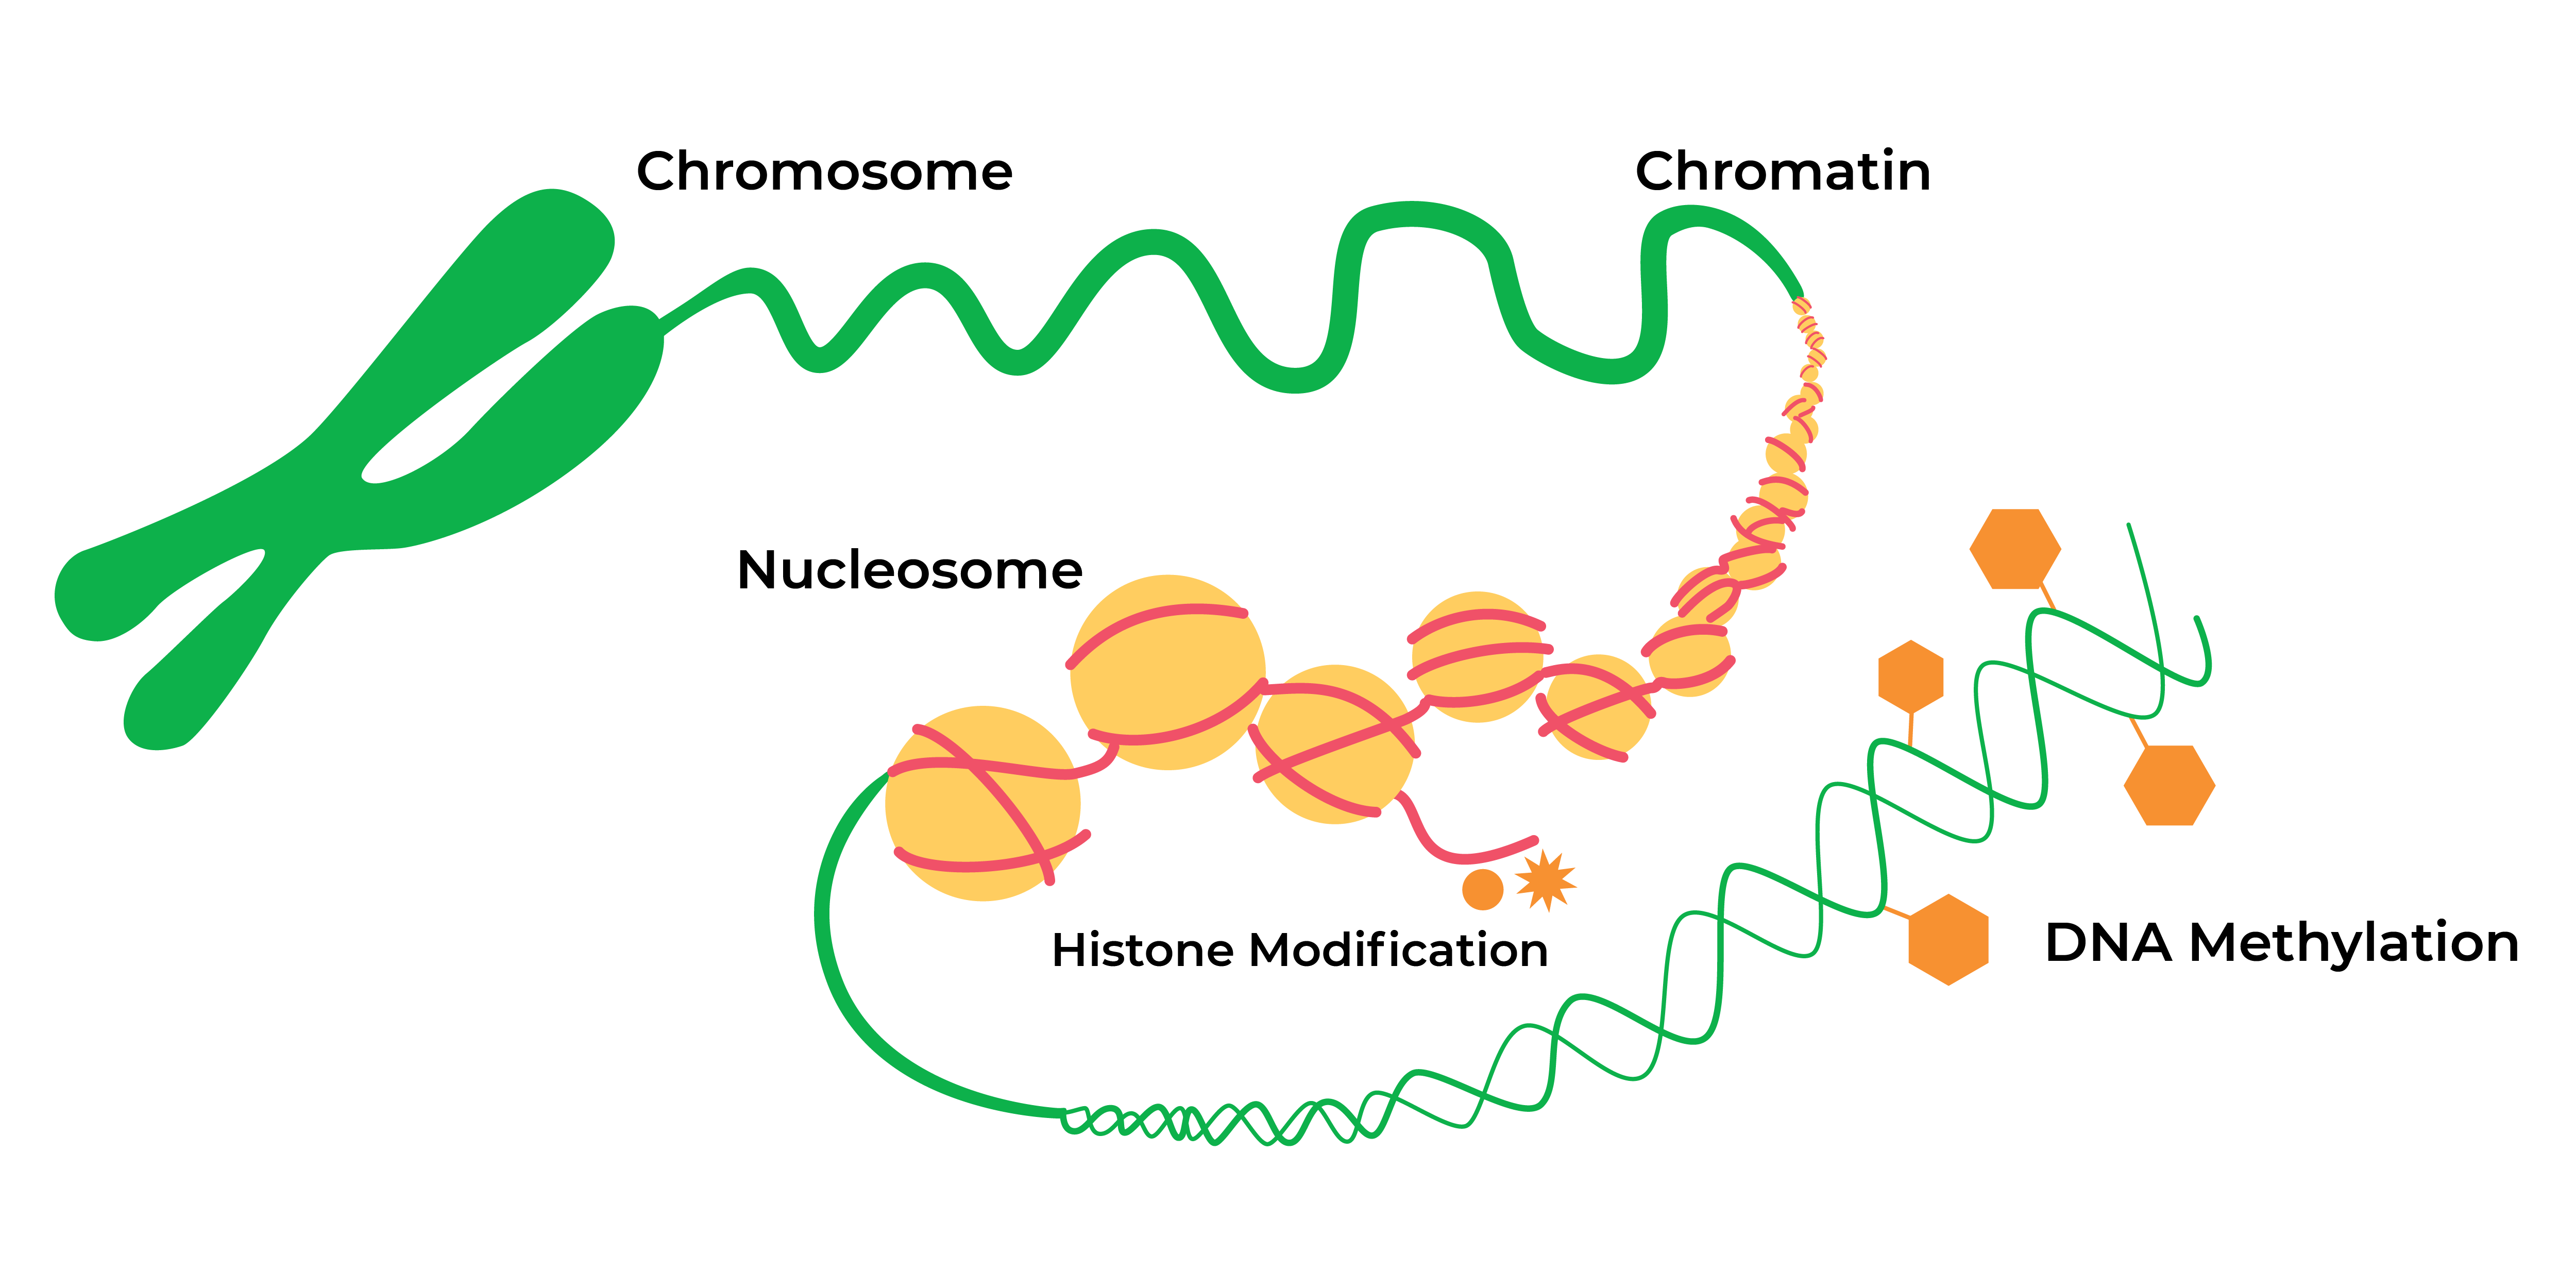 Figure showing a chromosome, chromatin, nucleosome, and dna methylation.